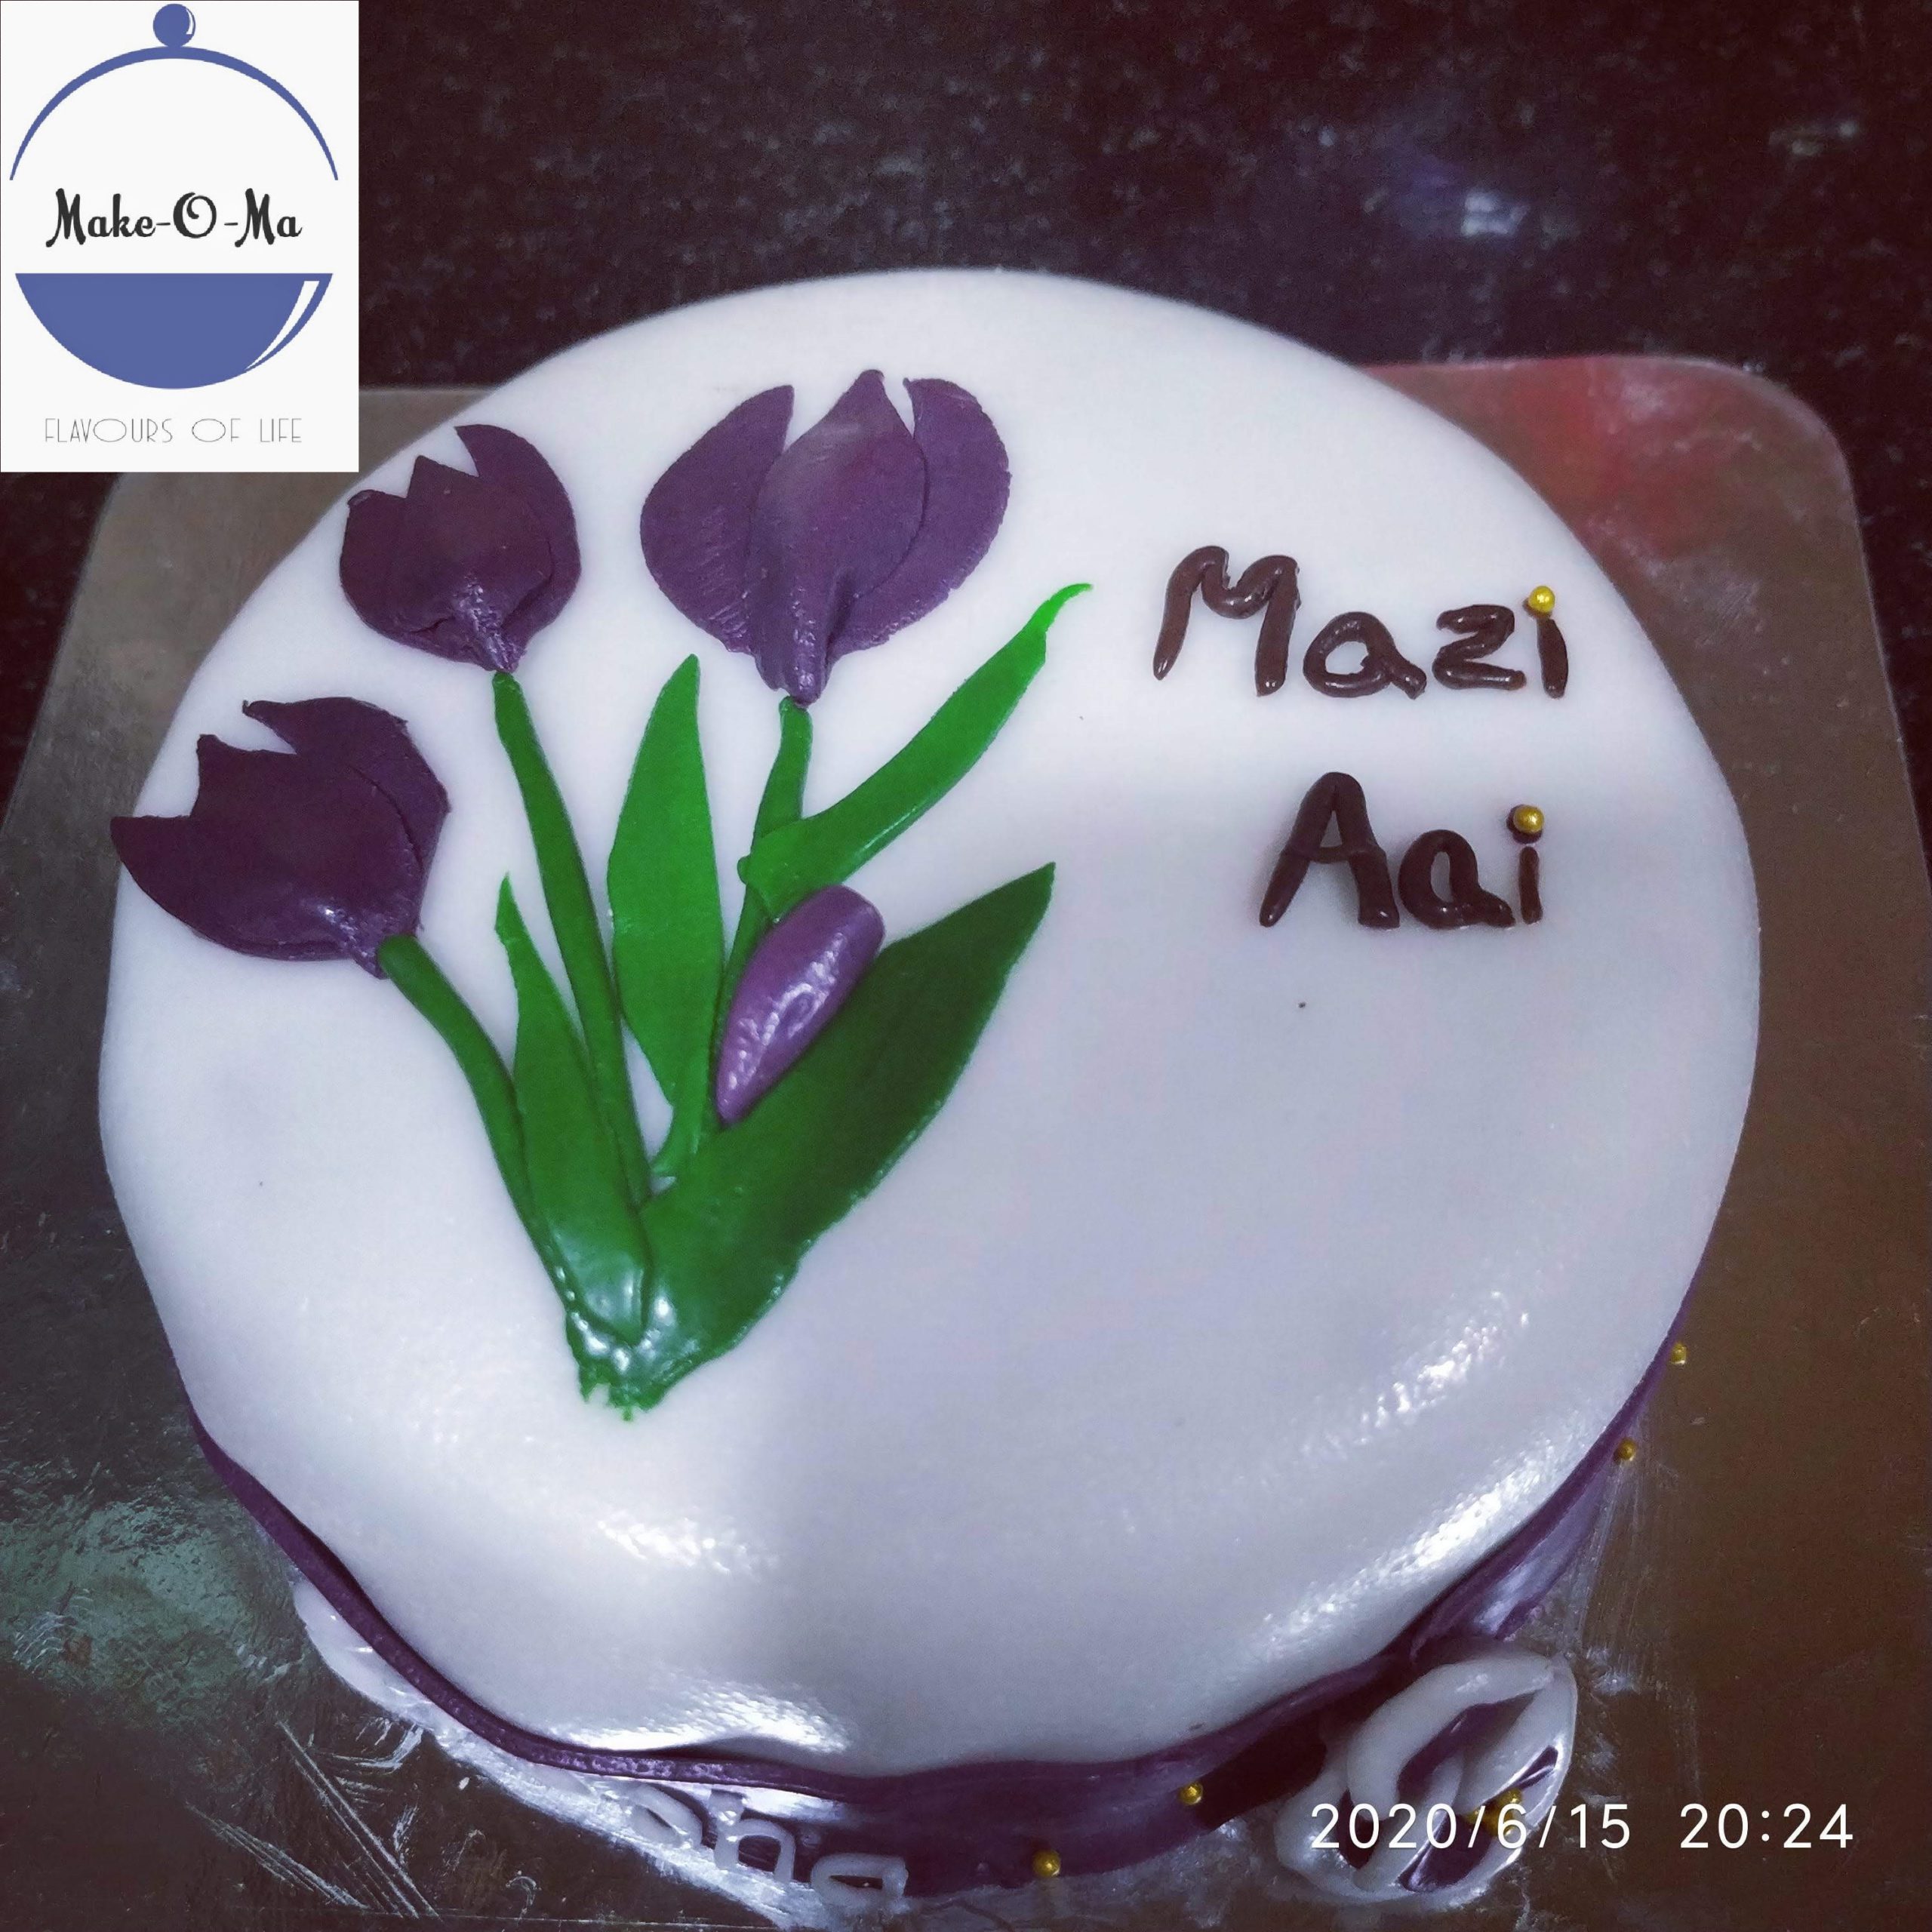 Mothers Day Cake Designs, Images, Price Near Me